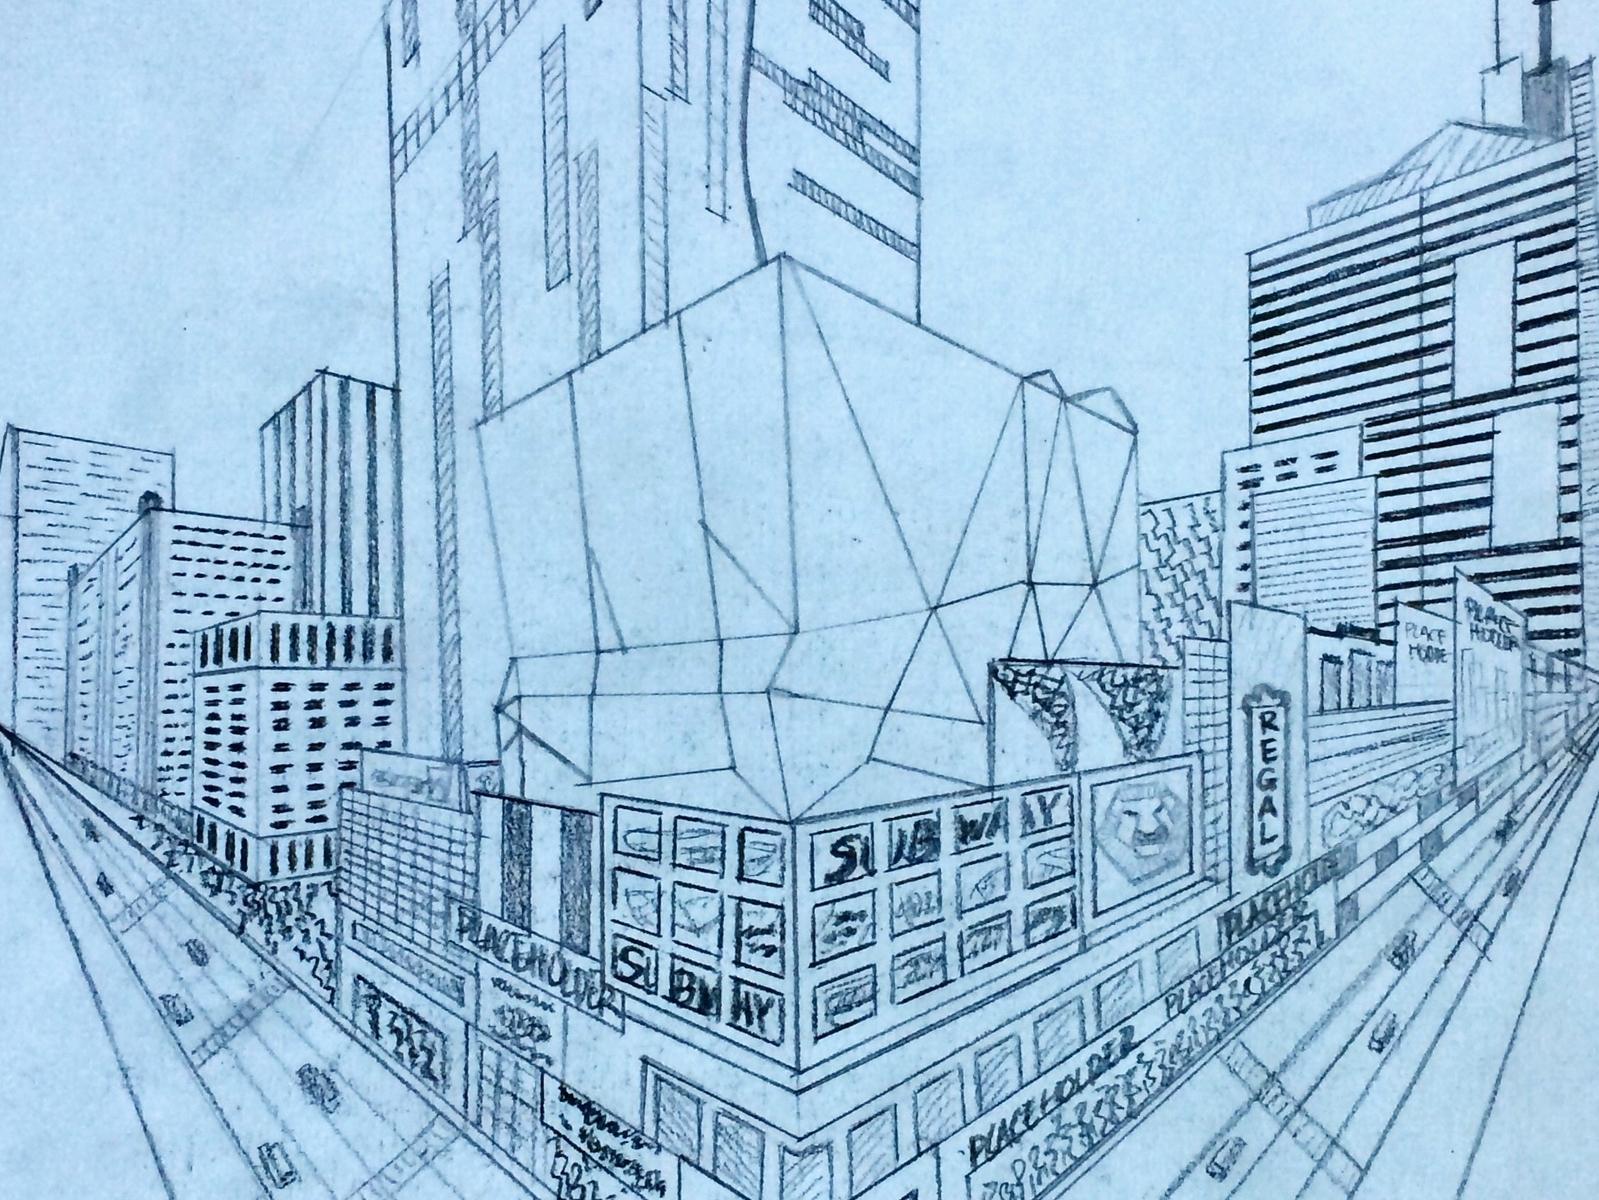 Details more than 148 perspective drawing images - seven.edu.vn